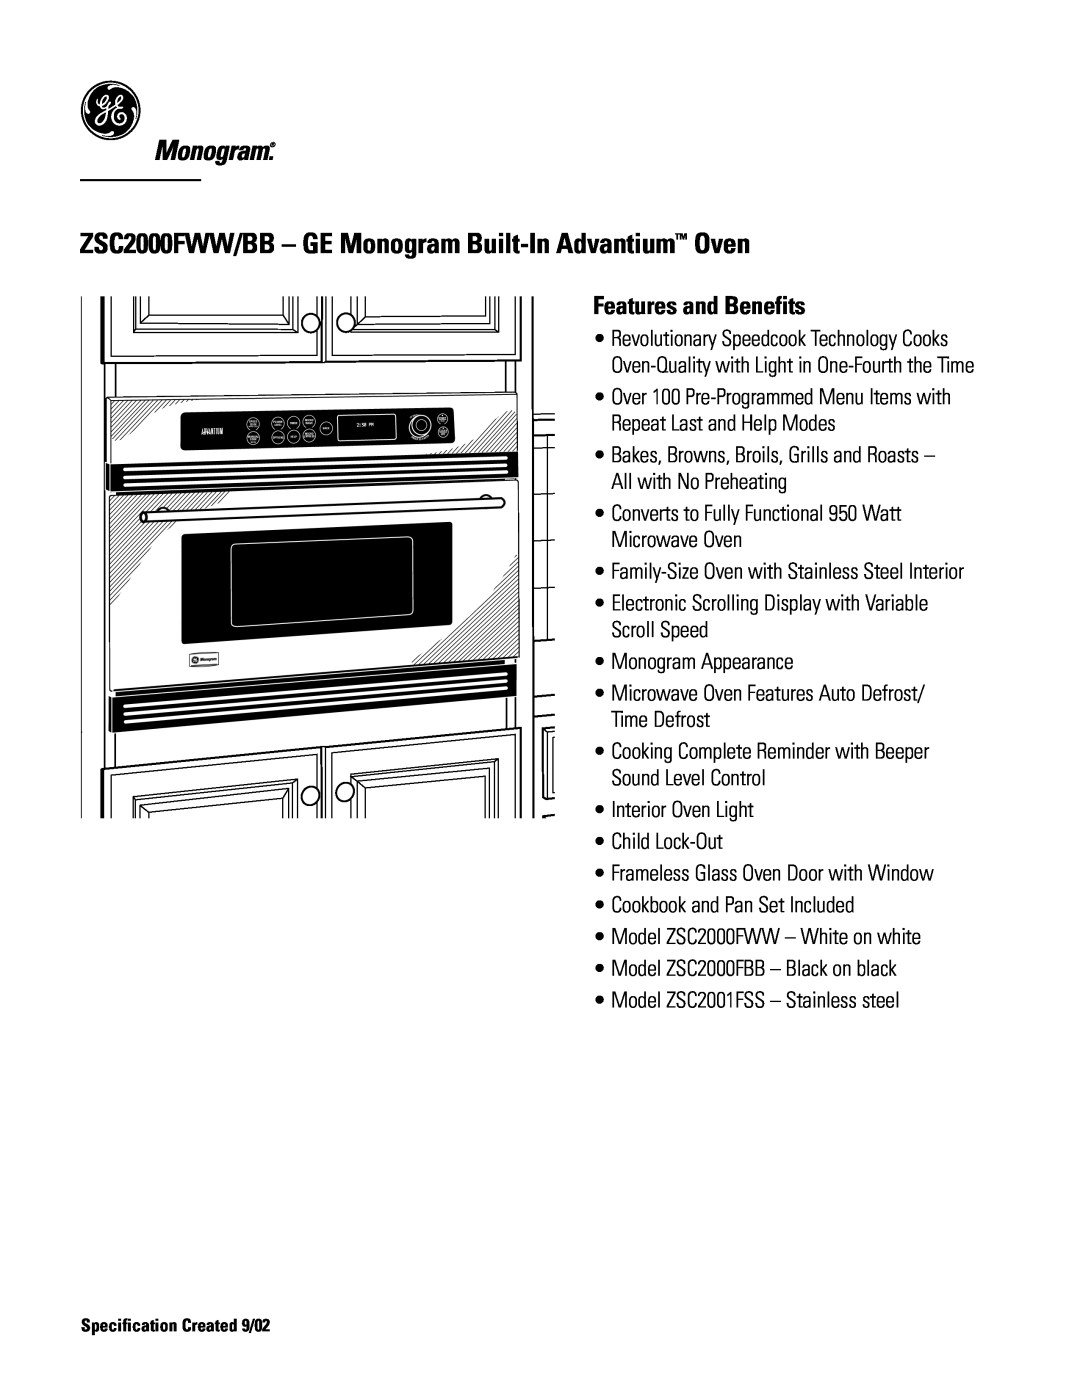 GE Monogram ZSC2000FWW/BB dimensions Features and Benefits 